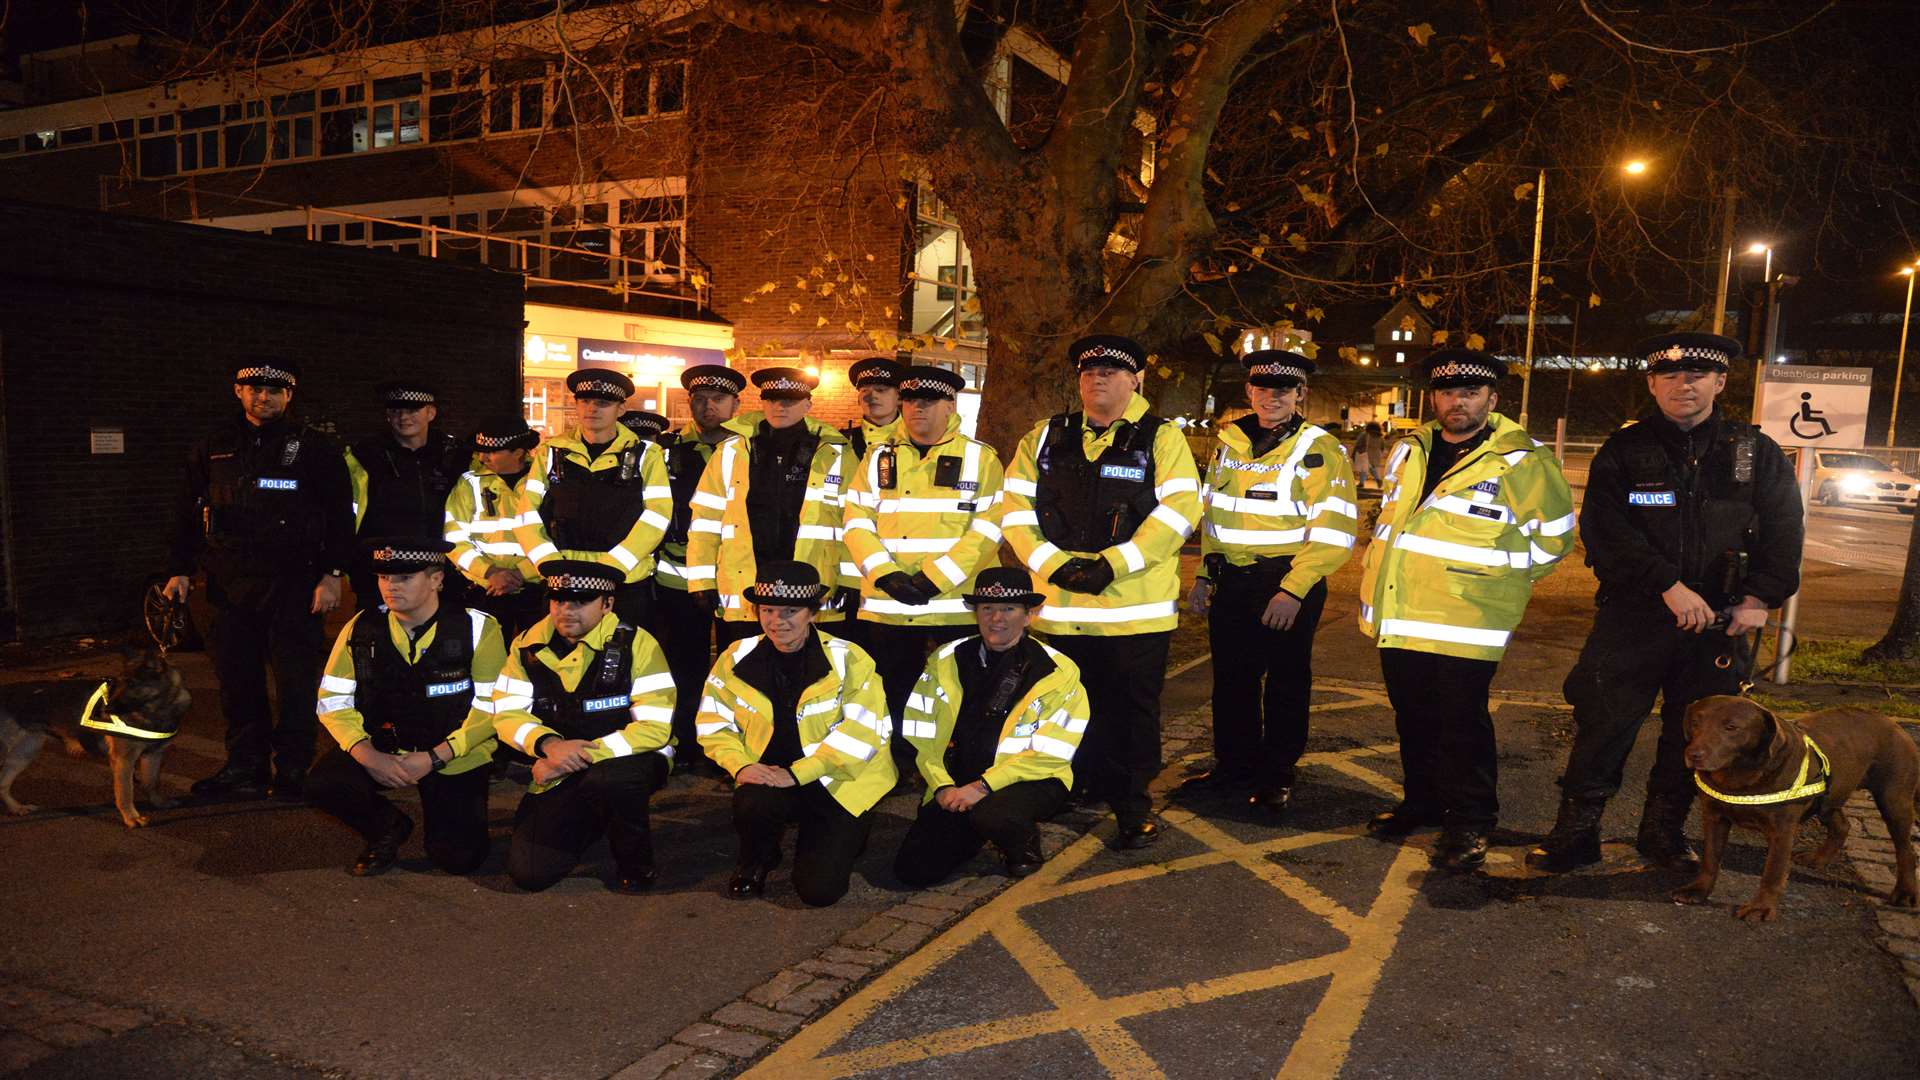 Police officers who took part in the drug operation on Saturday evening